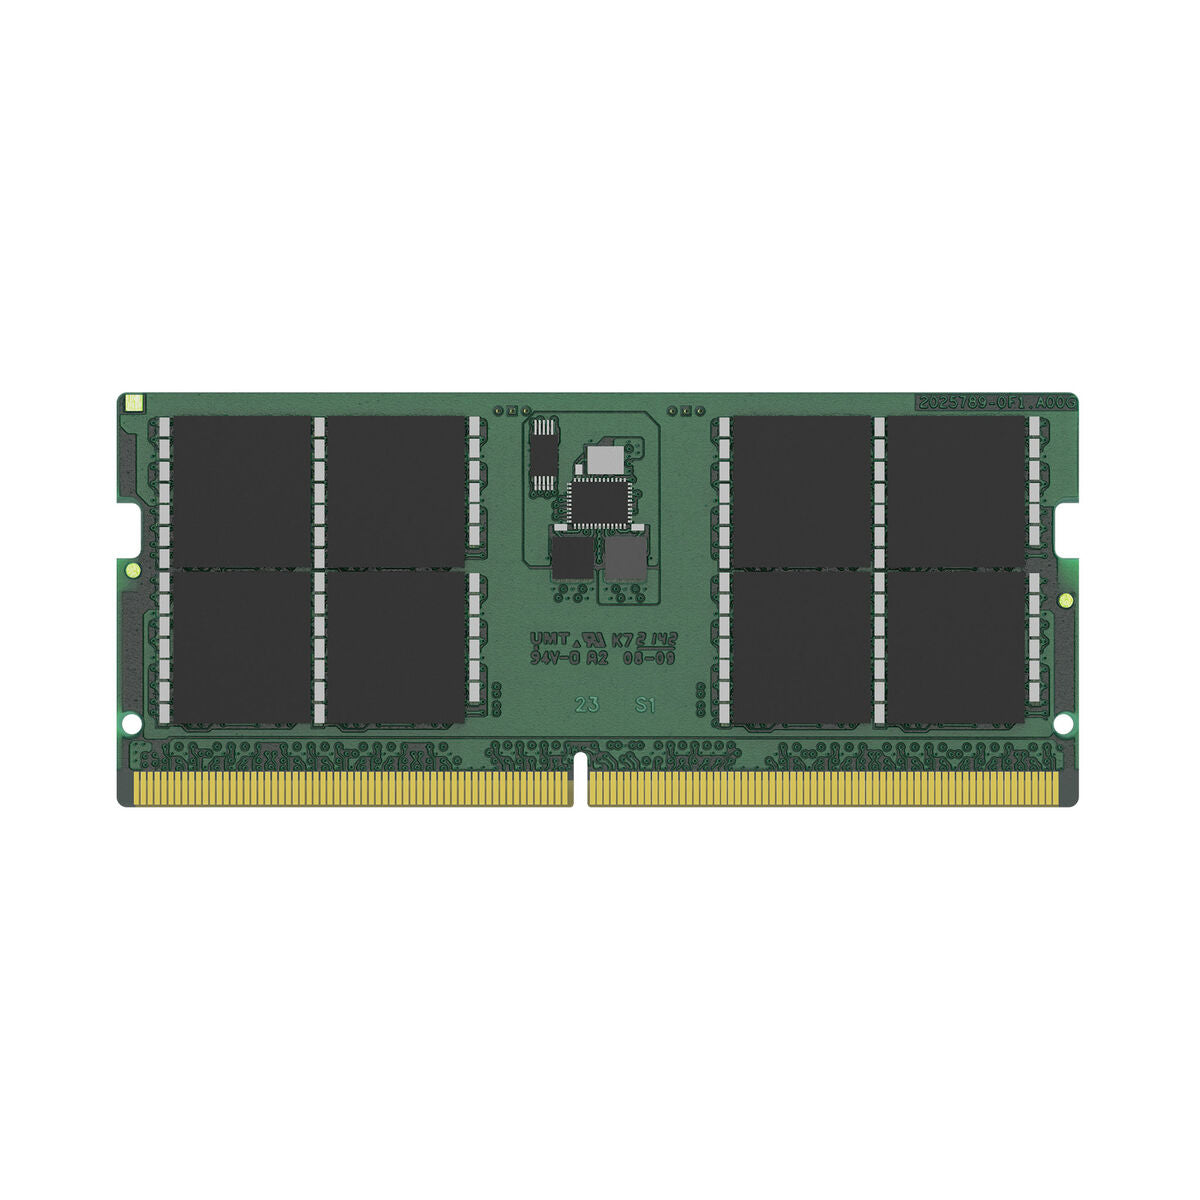 RAM Memory Kingston KCP556SD8-32 32 GB 5600 MHz DDR5 SDRAM DDR5, Kingston, Computing, Components, ram-memory-kingston-kcp556sd8-32-32-gb-5600-mhz-ddr5-sdram-ddr5, Brand_Kingston, category-reference-2609, category-reference-2803, category-reference-2807, category-reference-t-19685, category-reference-t-19912, category-reference-t-21360, category-reference-t-25658, computers / components, Condition_NEW, Price_100 - 200, Teleworking, RiotNook